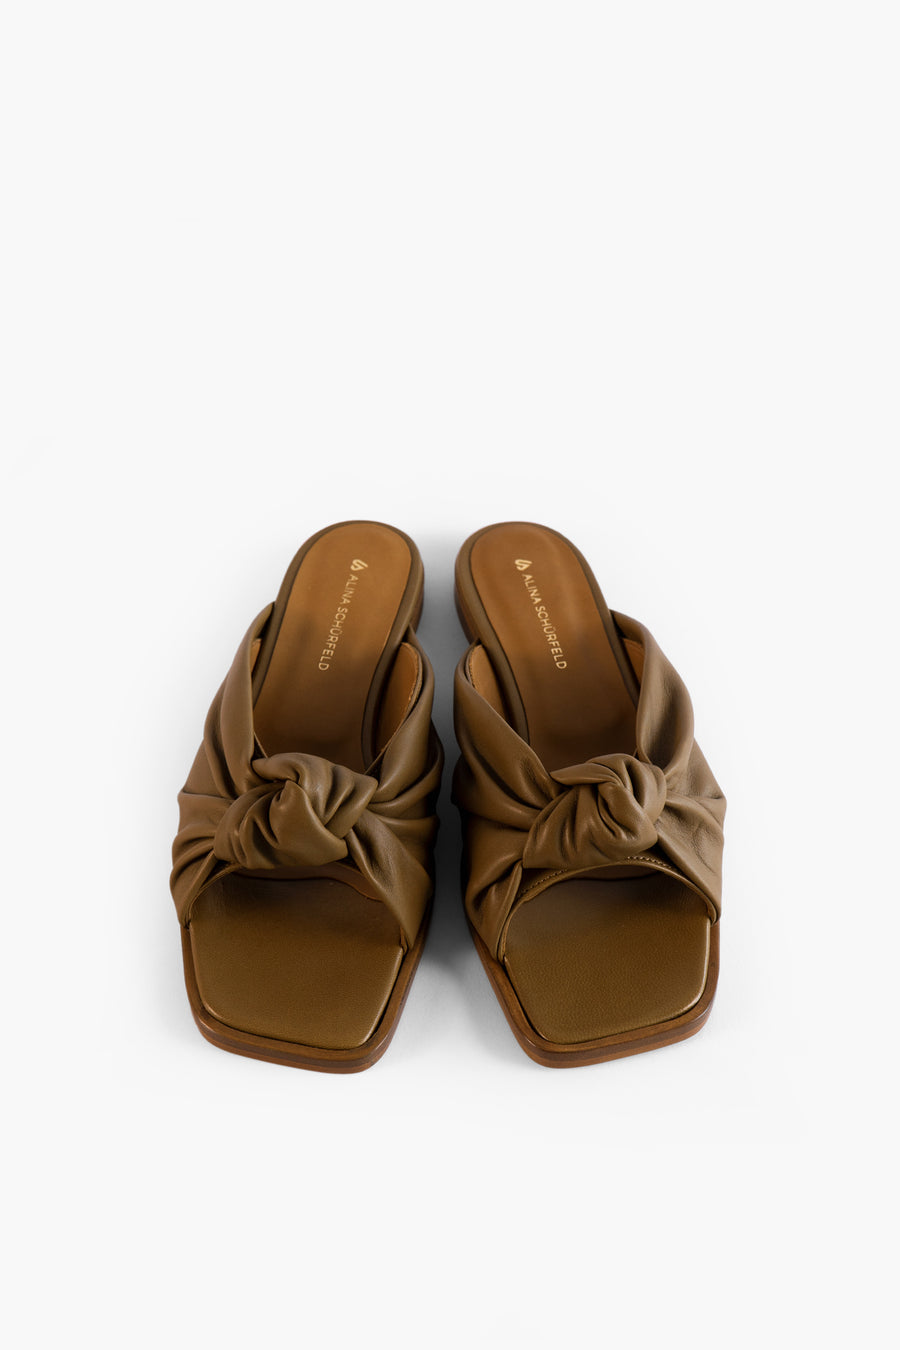 Made in Germany: the Tilly sandals are made from metal-free tanned leather and locally produced in Hamburg by Alina Schürfeld. 